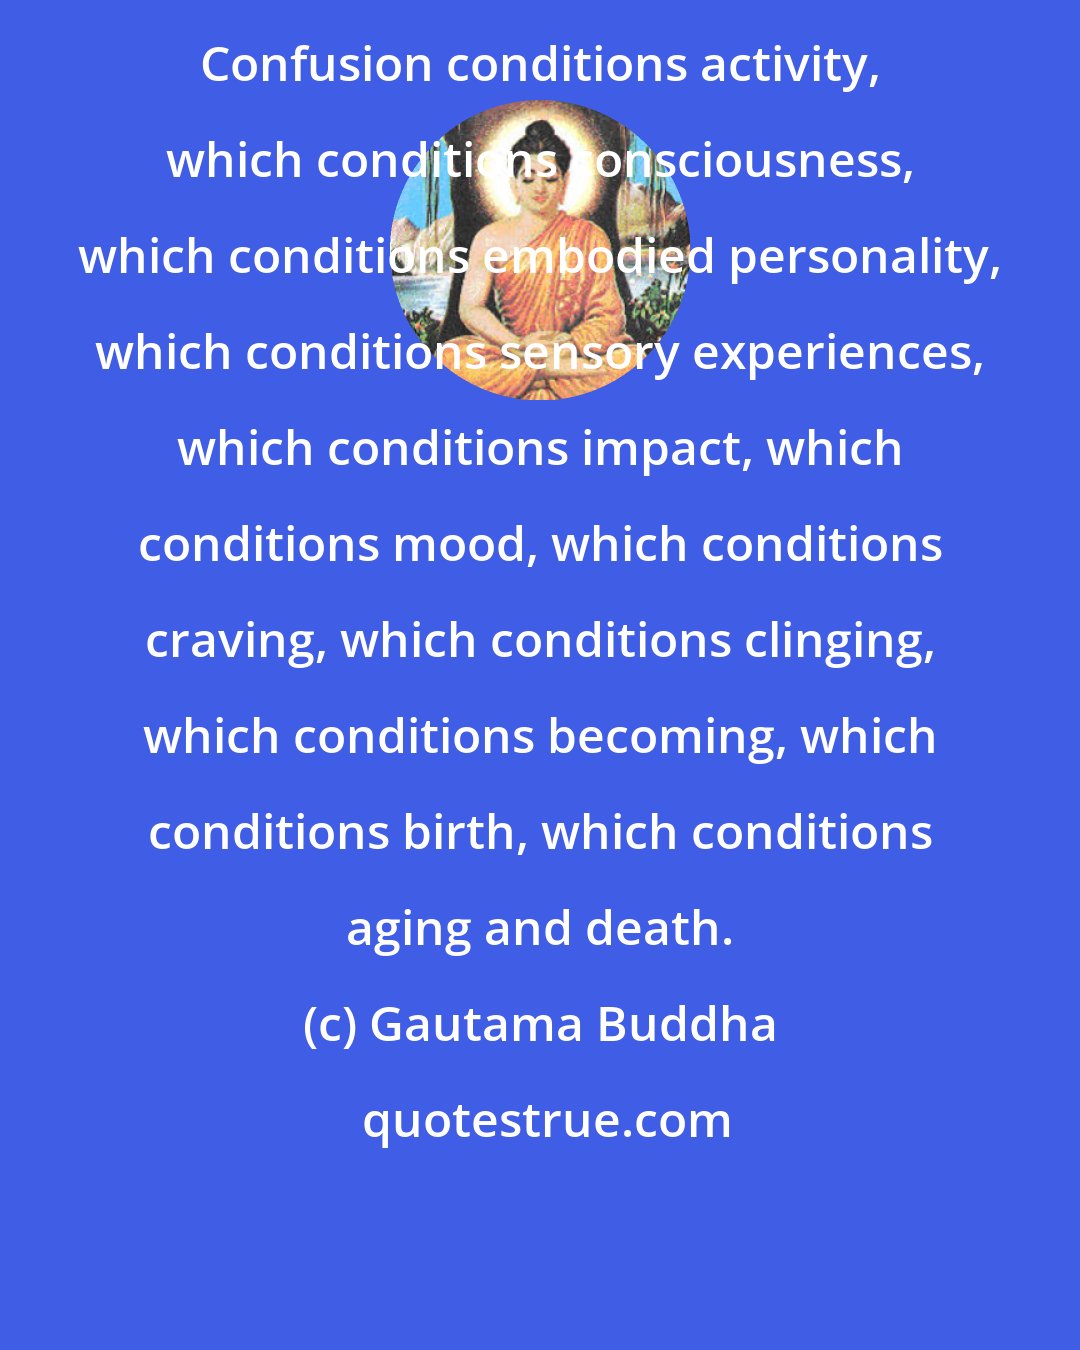 Gautama Buddha: Confusion conditions activity, which conditions consciousness, which conditions embodied personality, which conditions sensory experiences, which conditions impact, which conditions mood, which conditions craving, which conditions clinging, which conditions becoming, which conditions birth, which conditions aging and death.